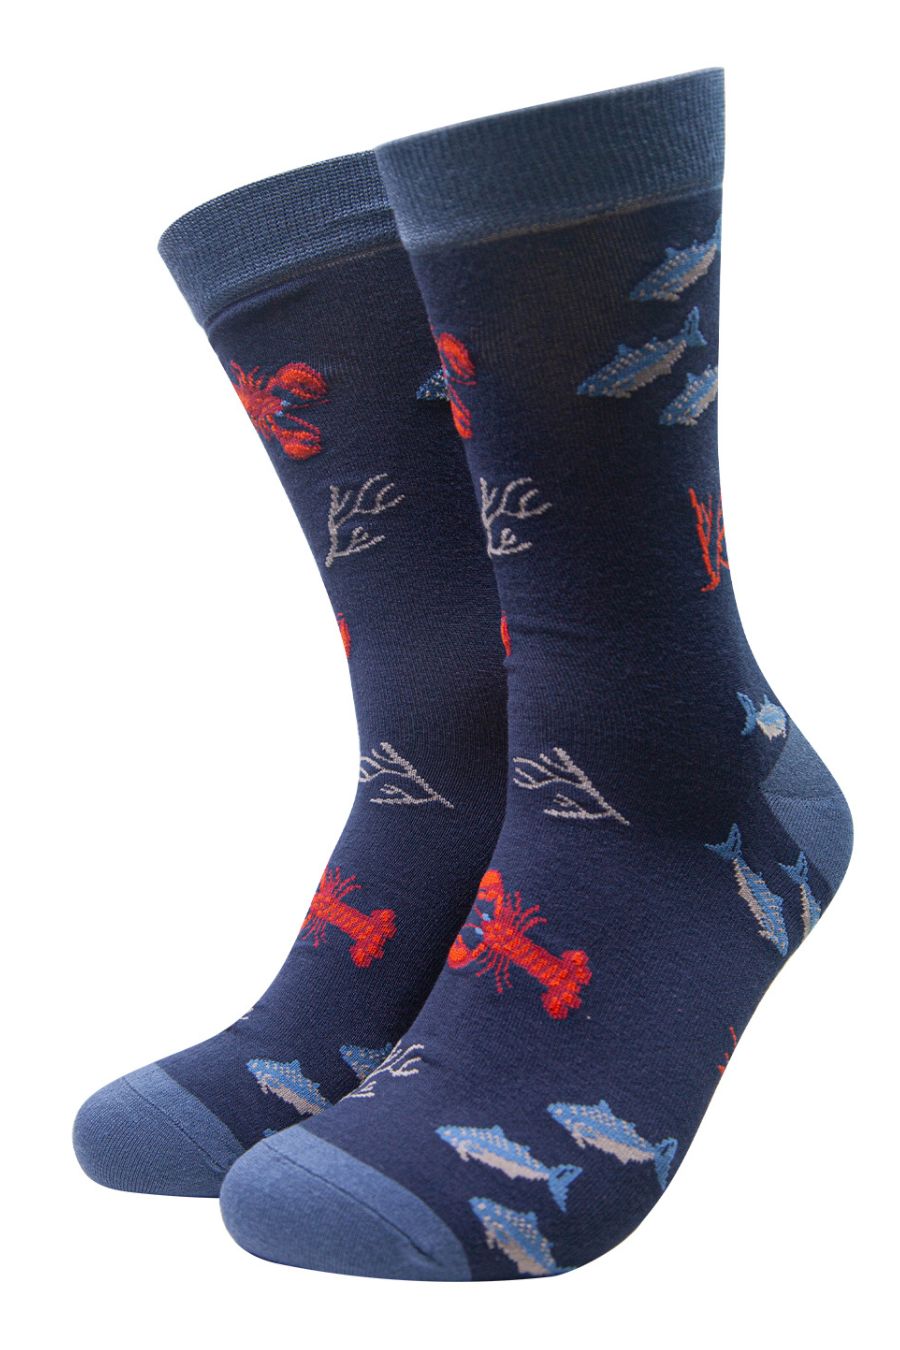 navy blue bamboo socks with red lobsters and fish